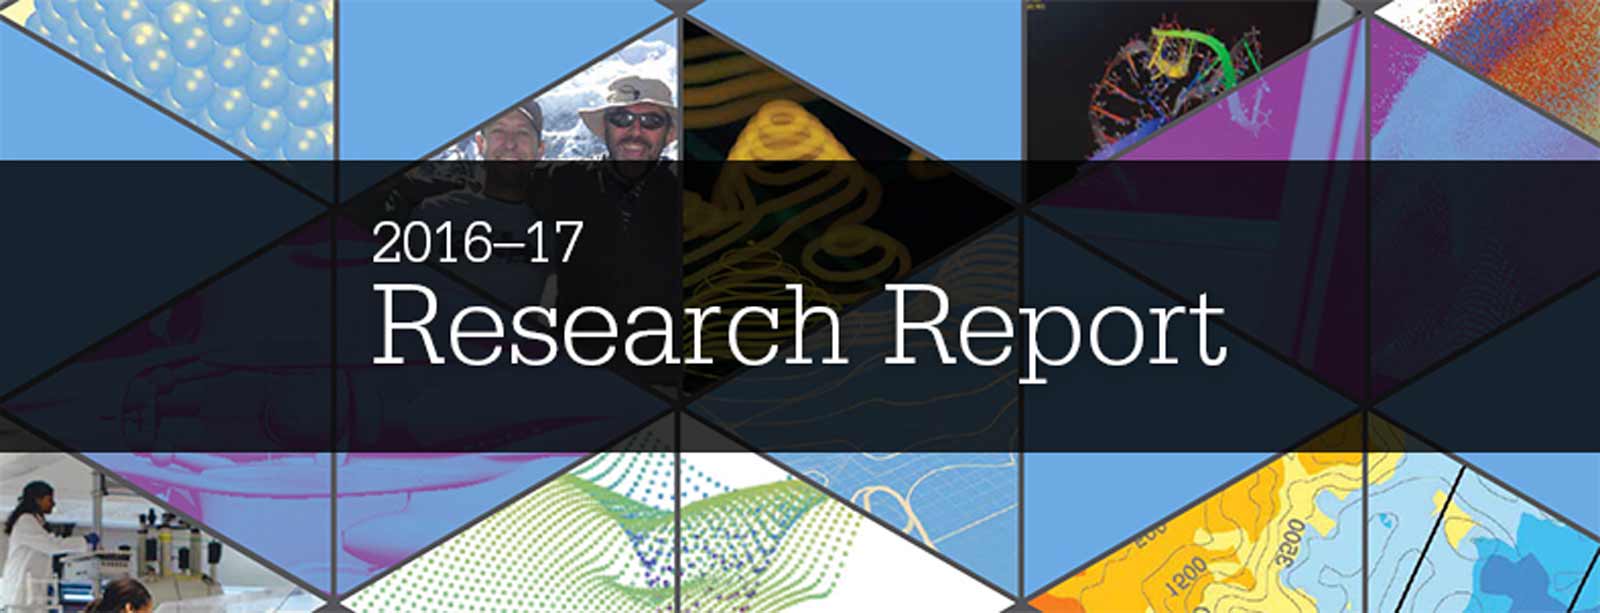 Research Report 2017 Banner